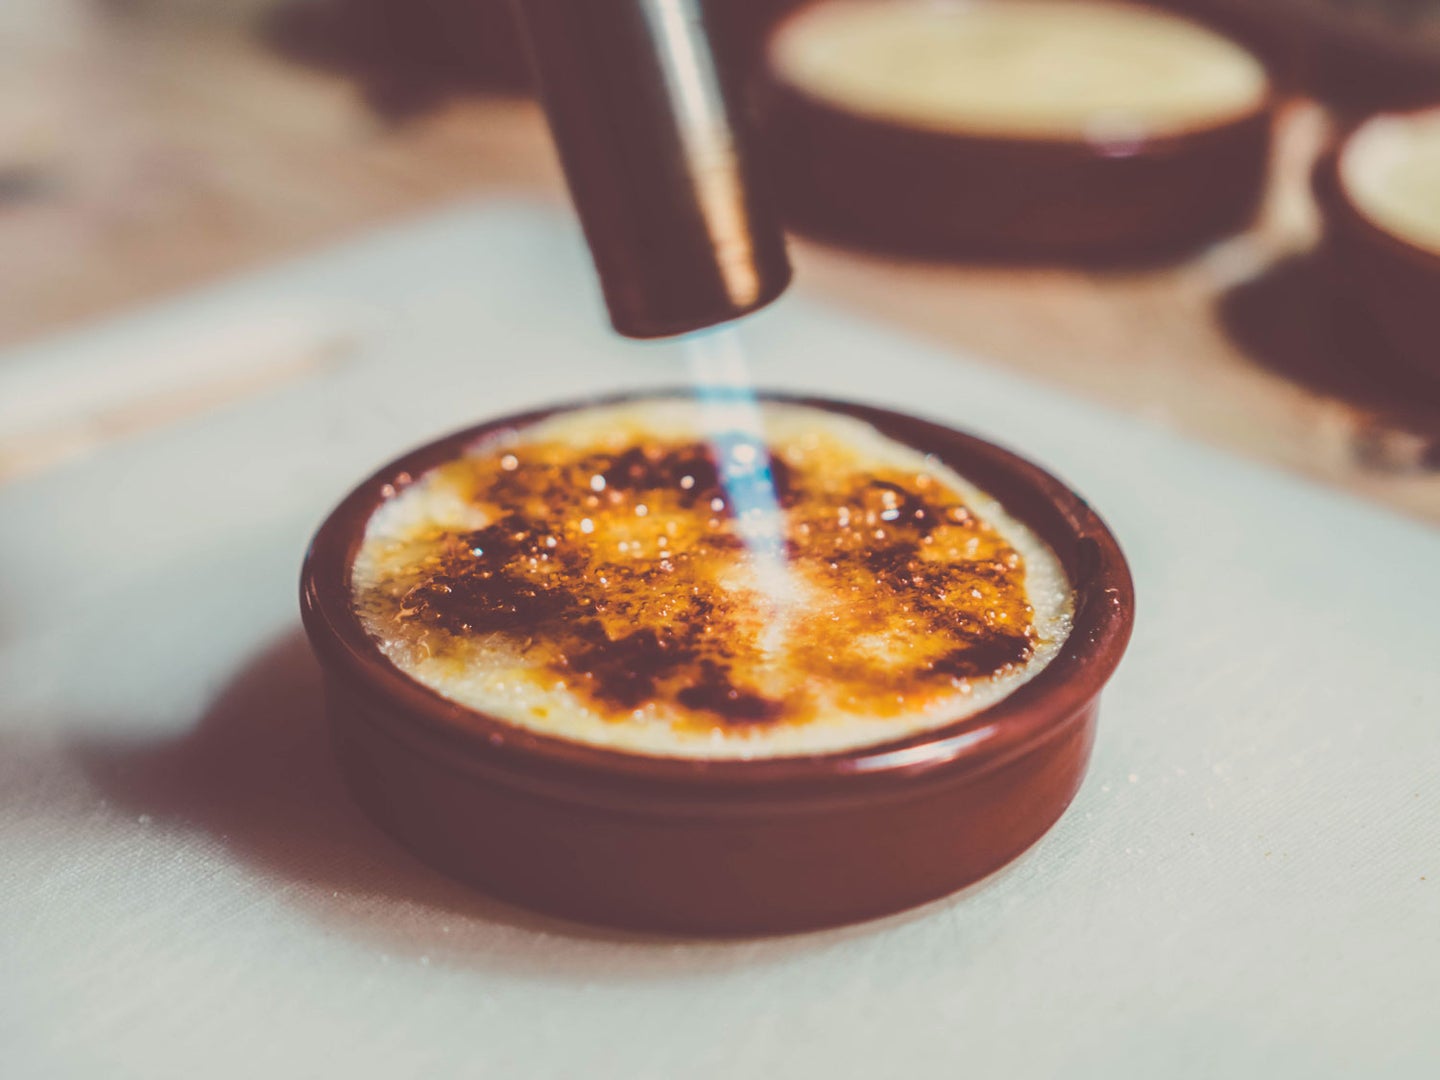 Using blow torch on creme brulee